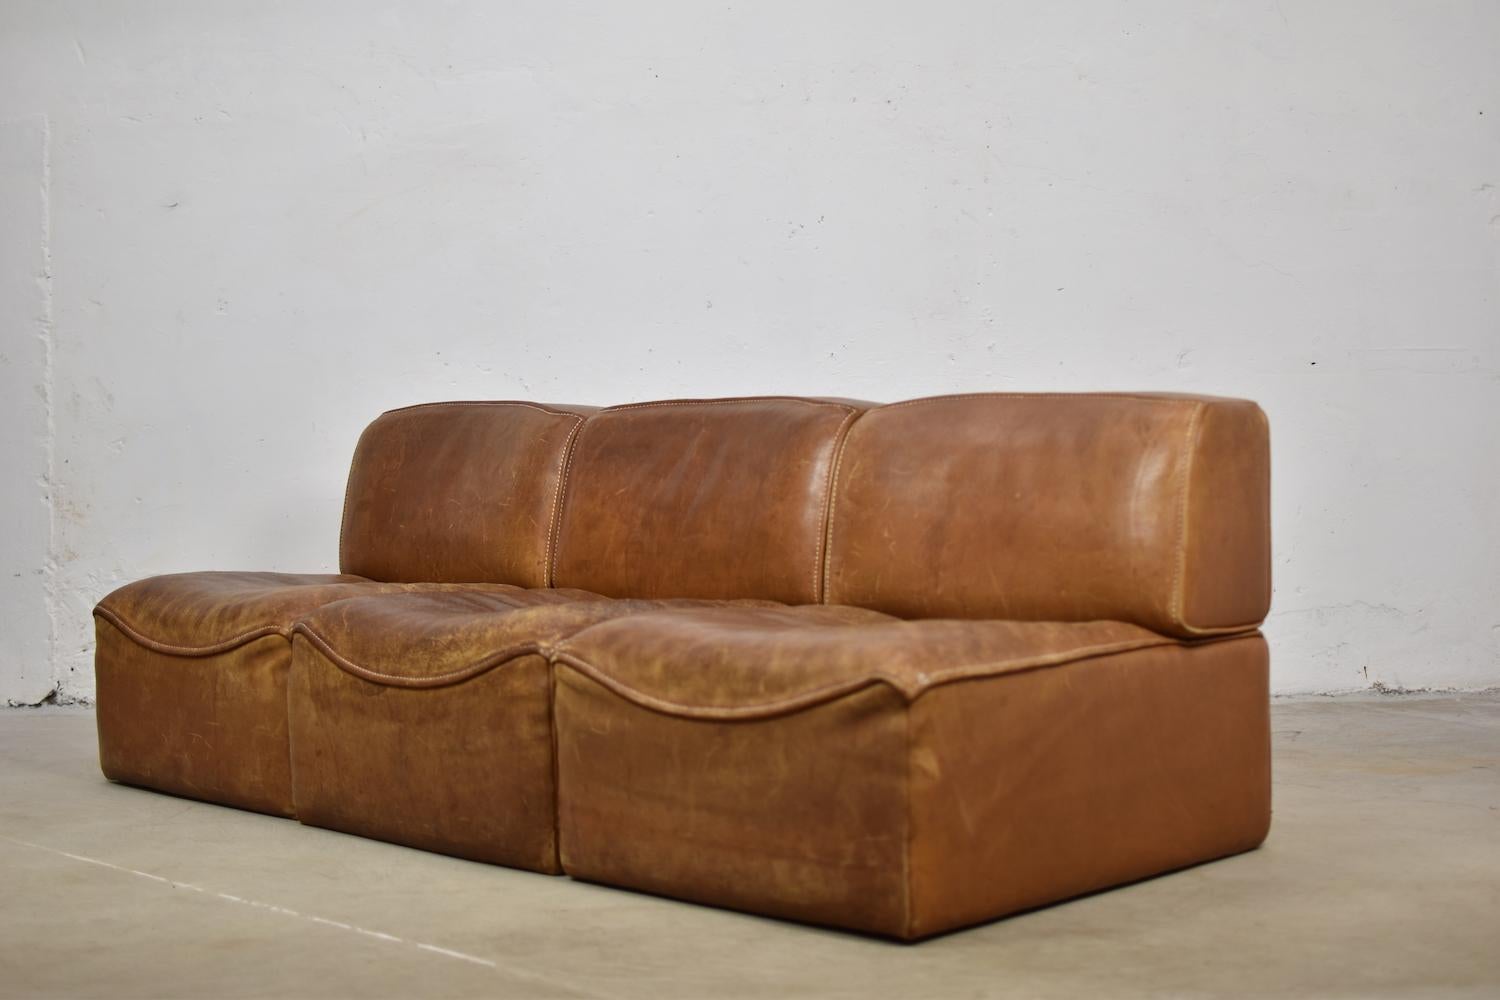 Great sectional ‘DS15’ sofa designed by De Sede, Switzerland, 1970s. This set consist of three individual elements and is made out of very thick cognac saddle leather which has beautifully been aged over the years. The design is simplistic yet